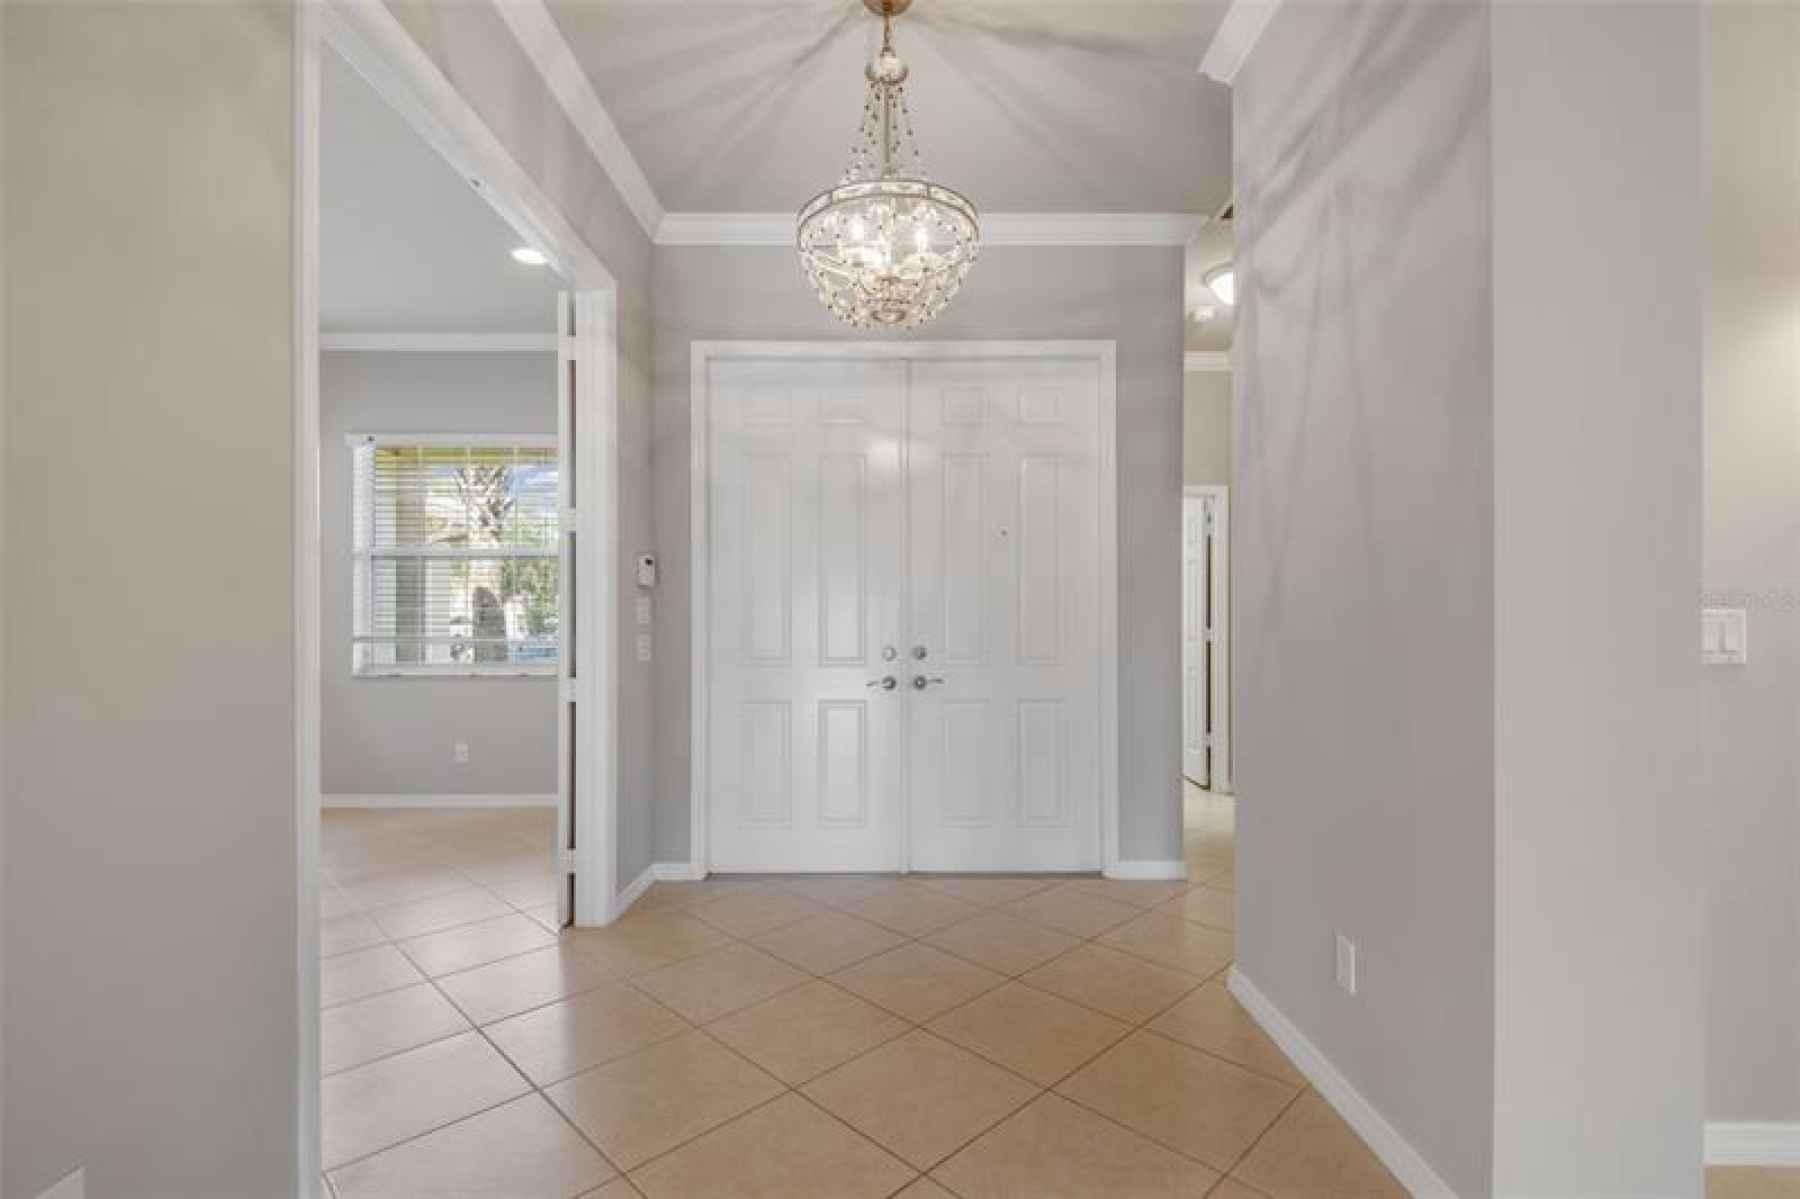 FOYER WITH GORGEOUS LIGHT FIXTURE